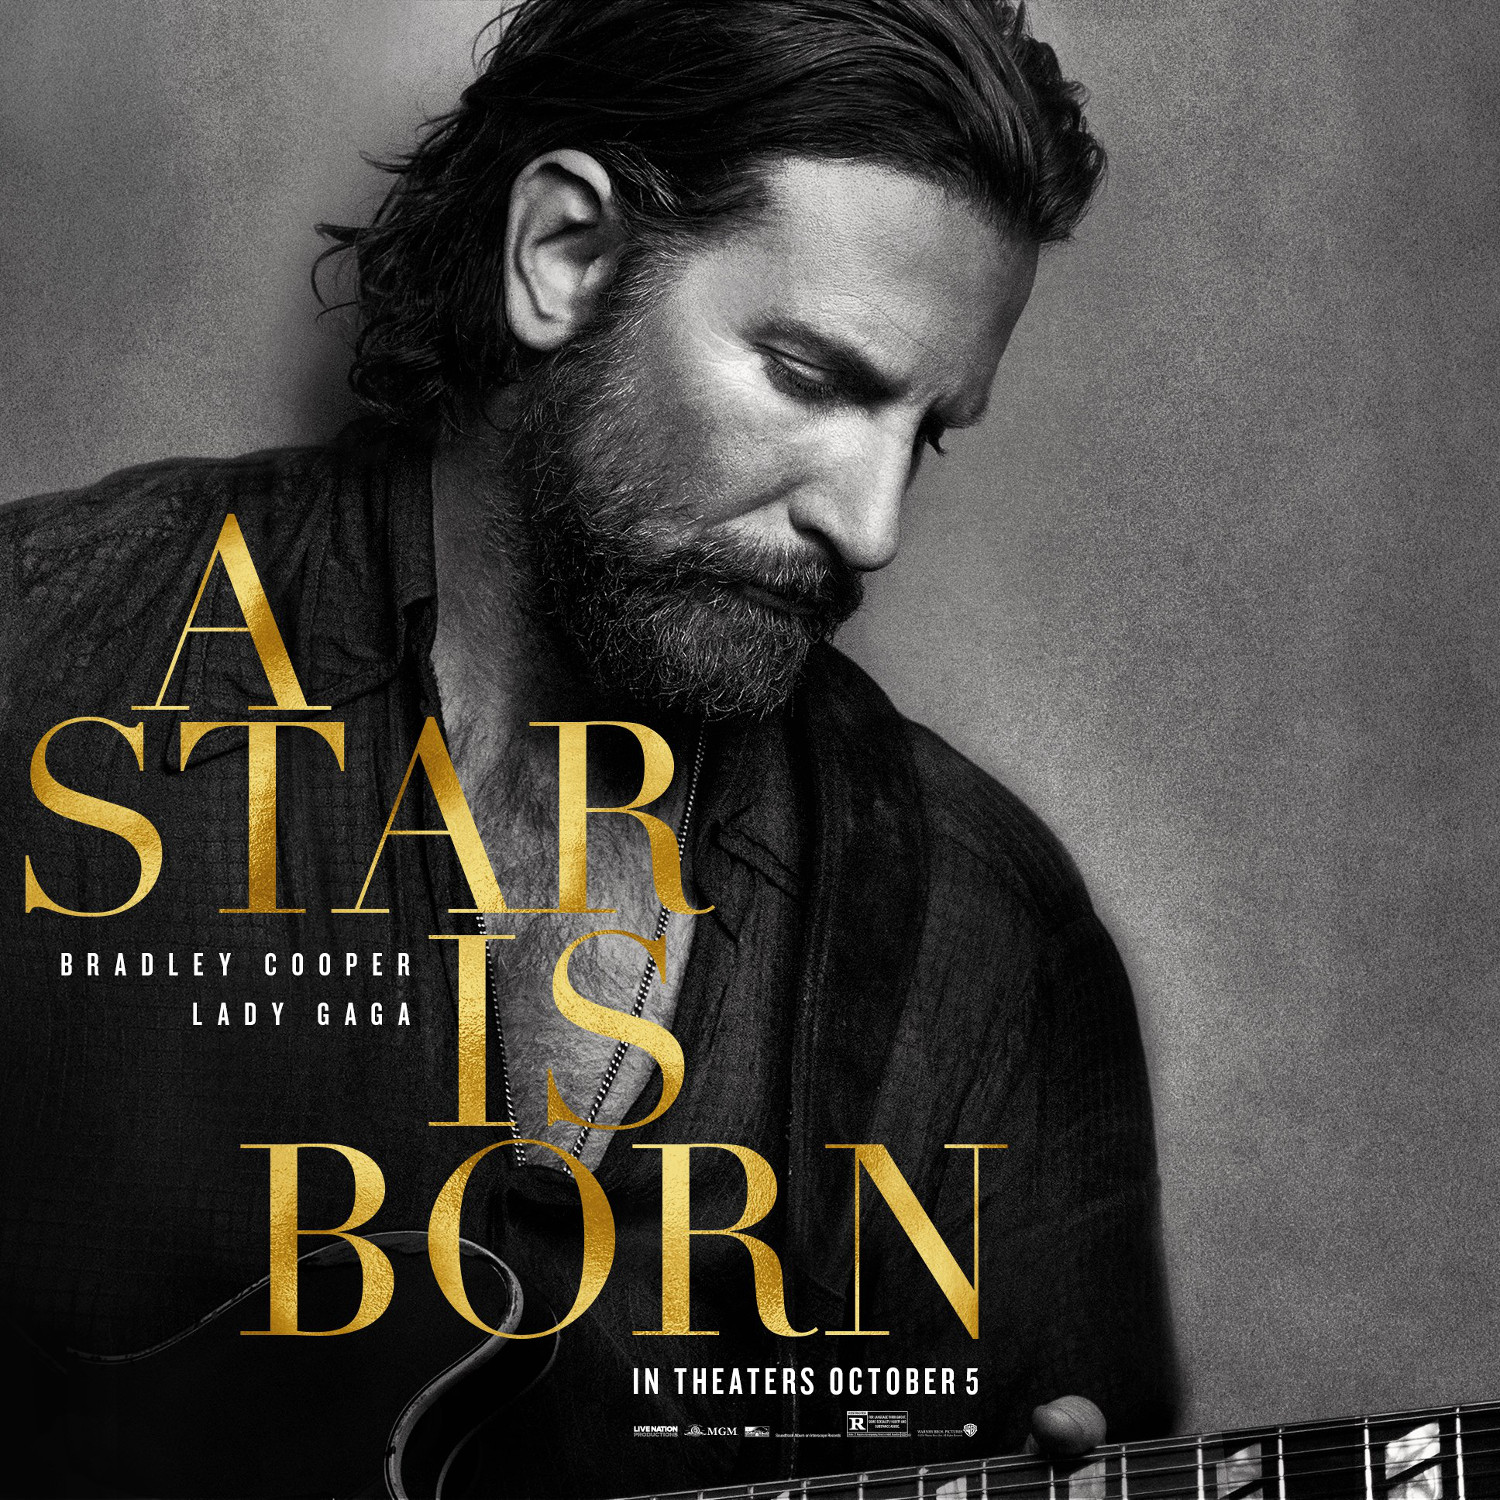 A Star Is Born, Film & Soundtrack Review